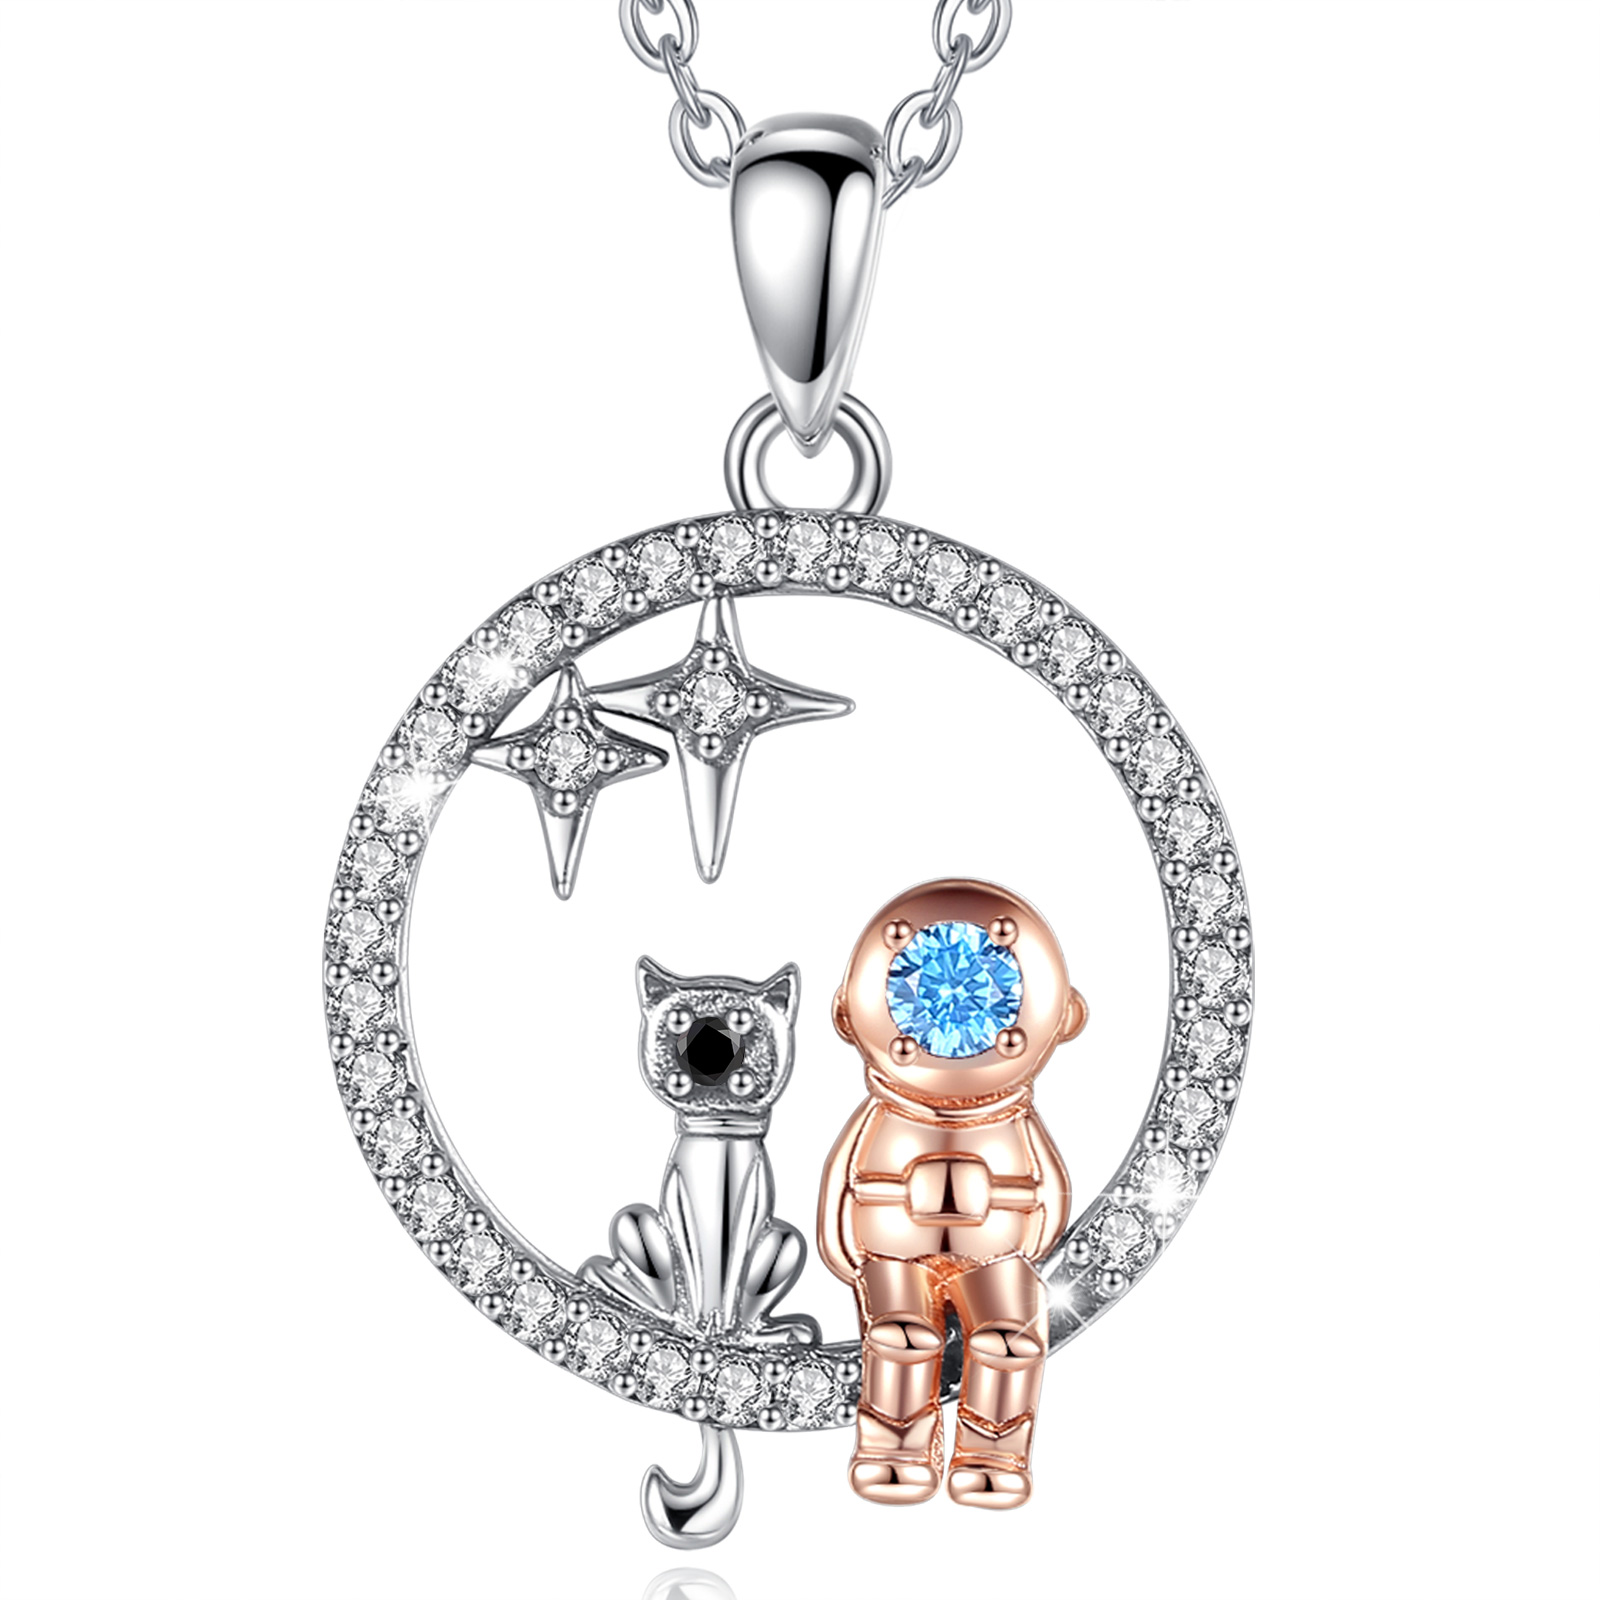 Merryshine Jewelry Fashion Trendy S925 Sterling Silver Spaceman and Cat Necklace with Cubic Zirconia